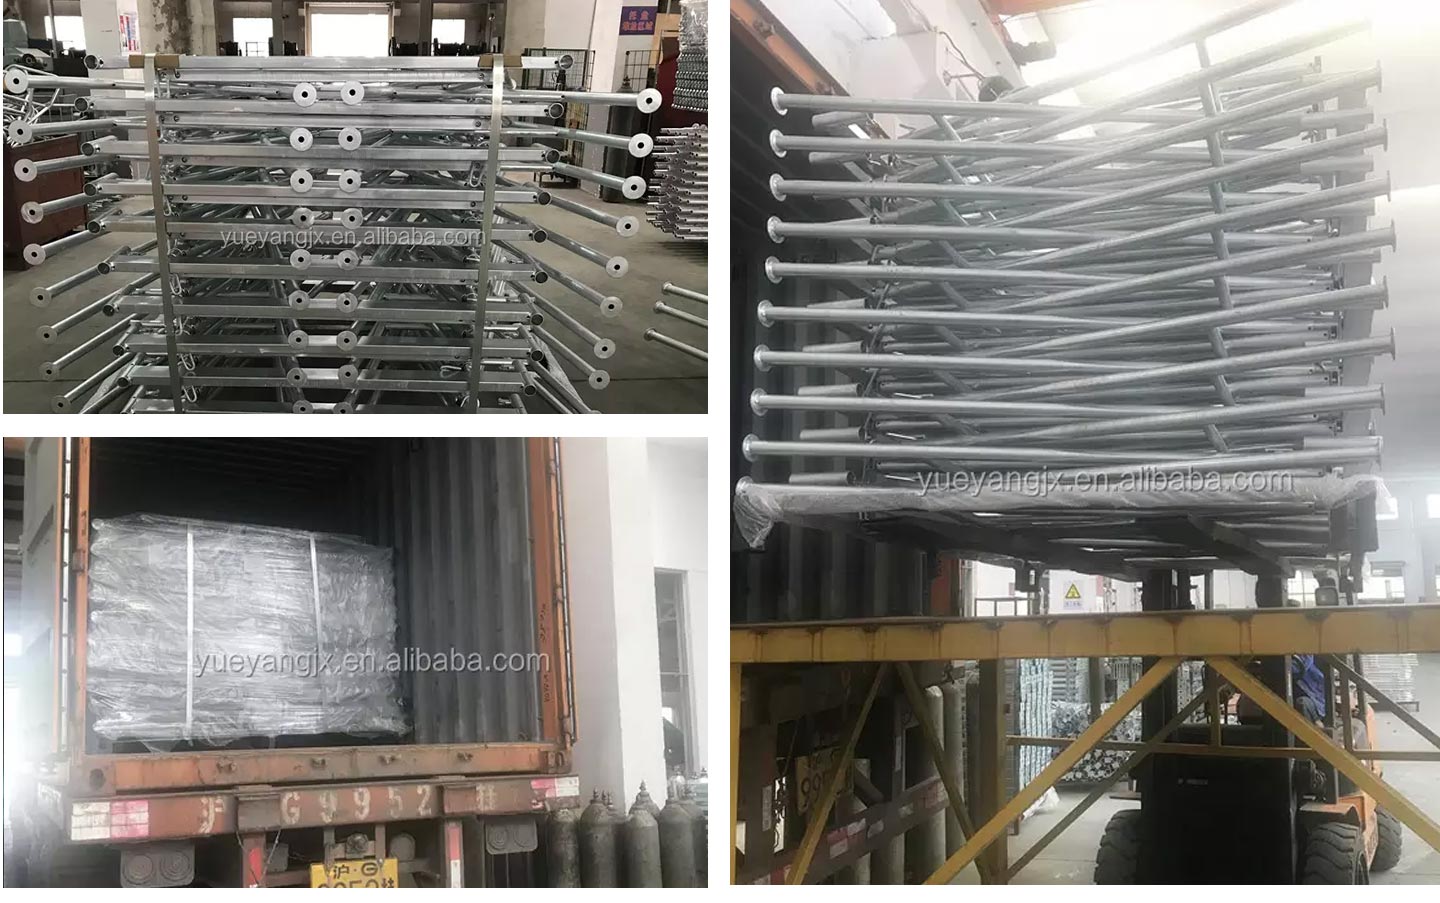 Steel Adjustable Scaffolding Trestle packing and shipping